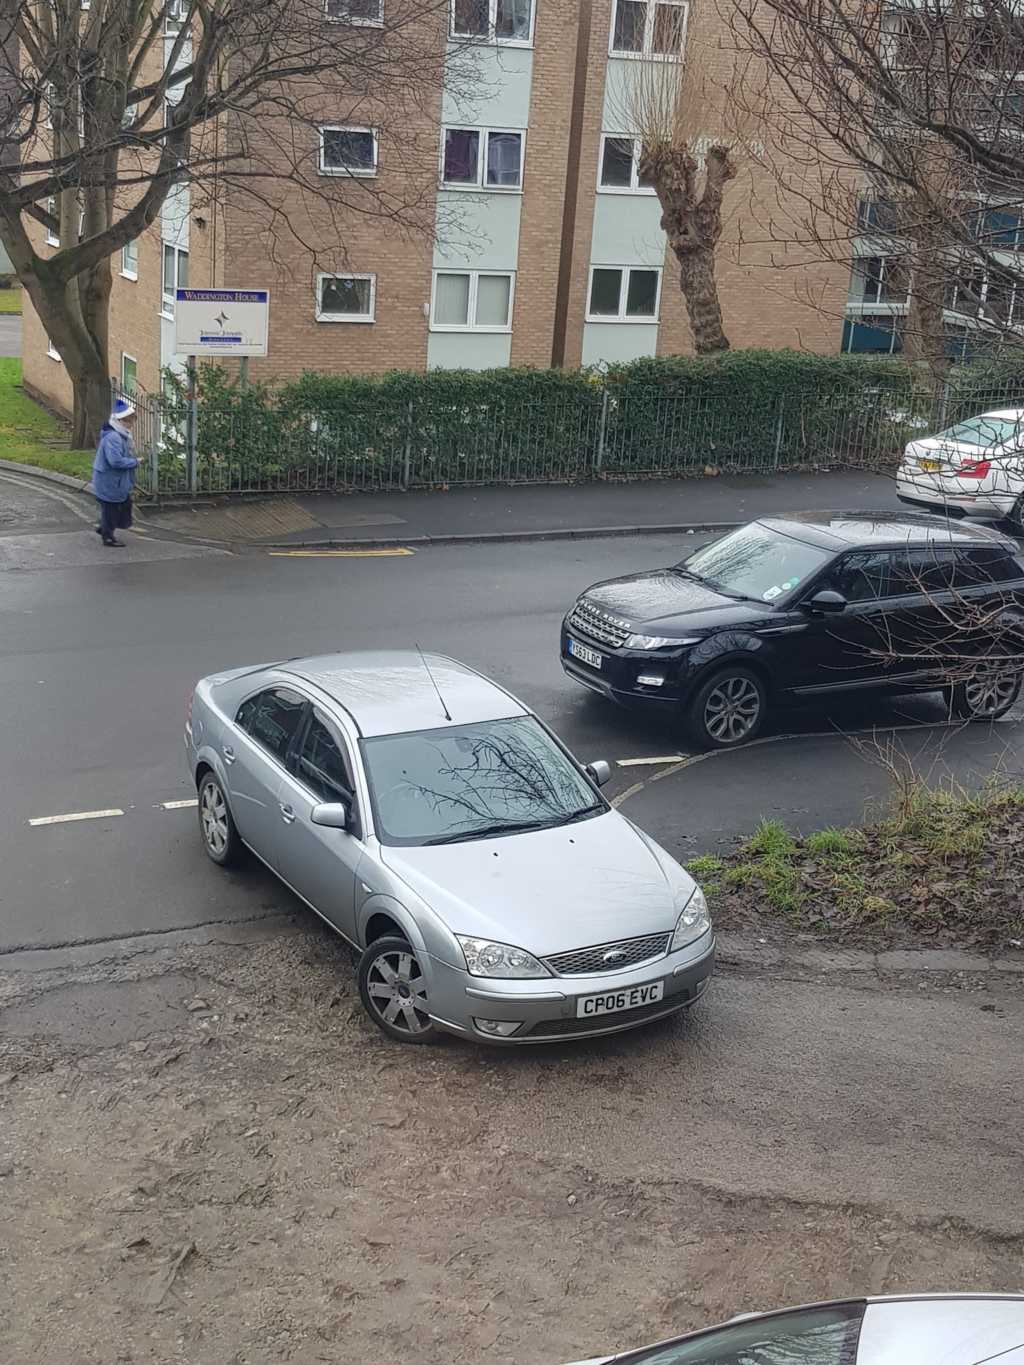 CP06 EVC displaying Inconsiderate Parking